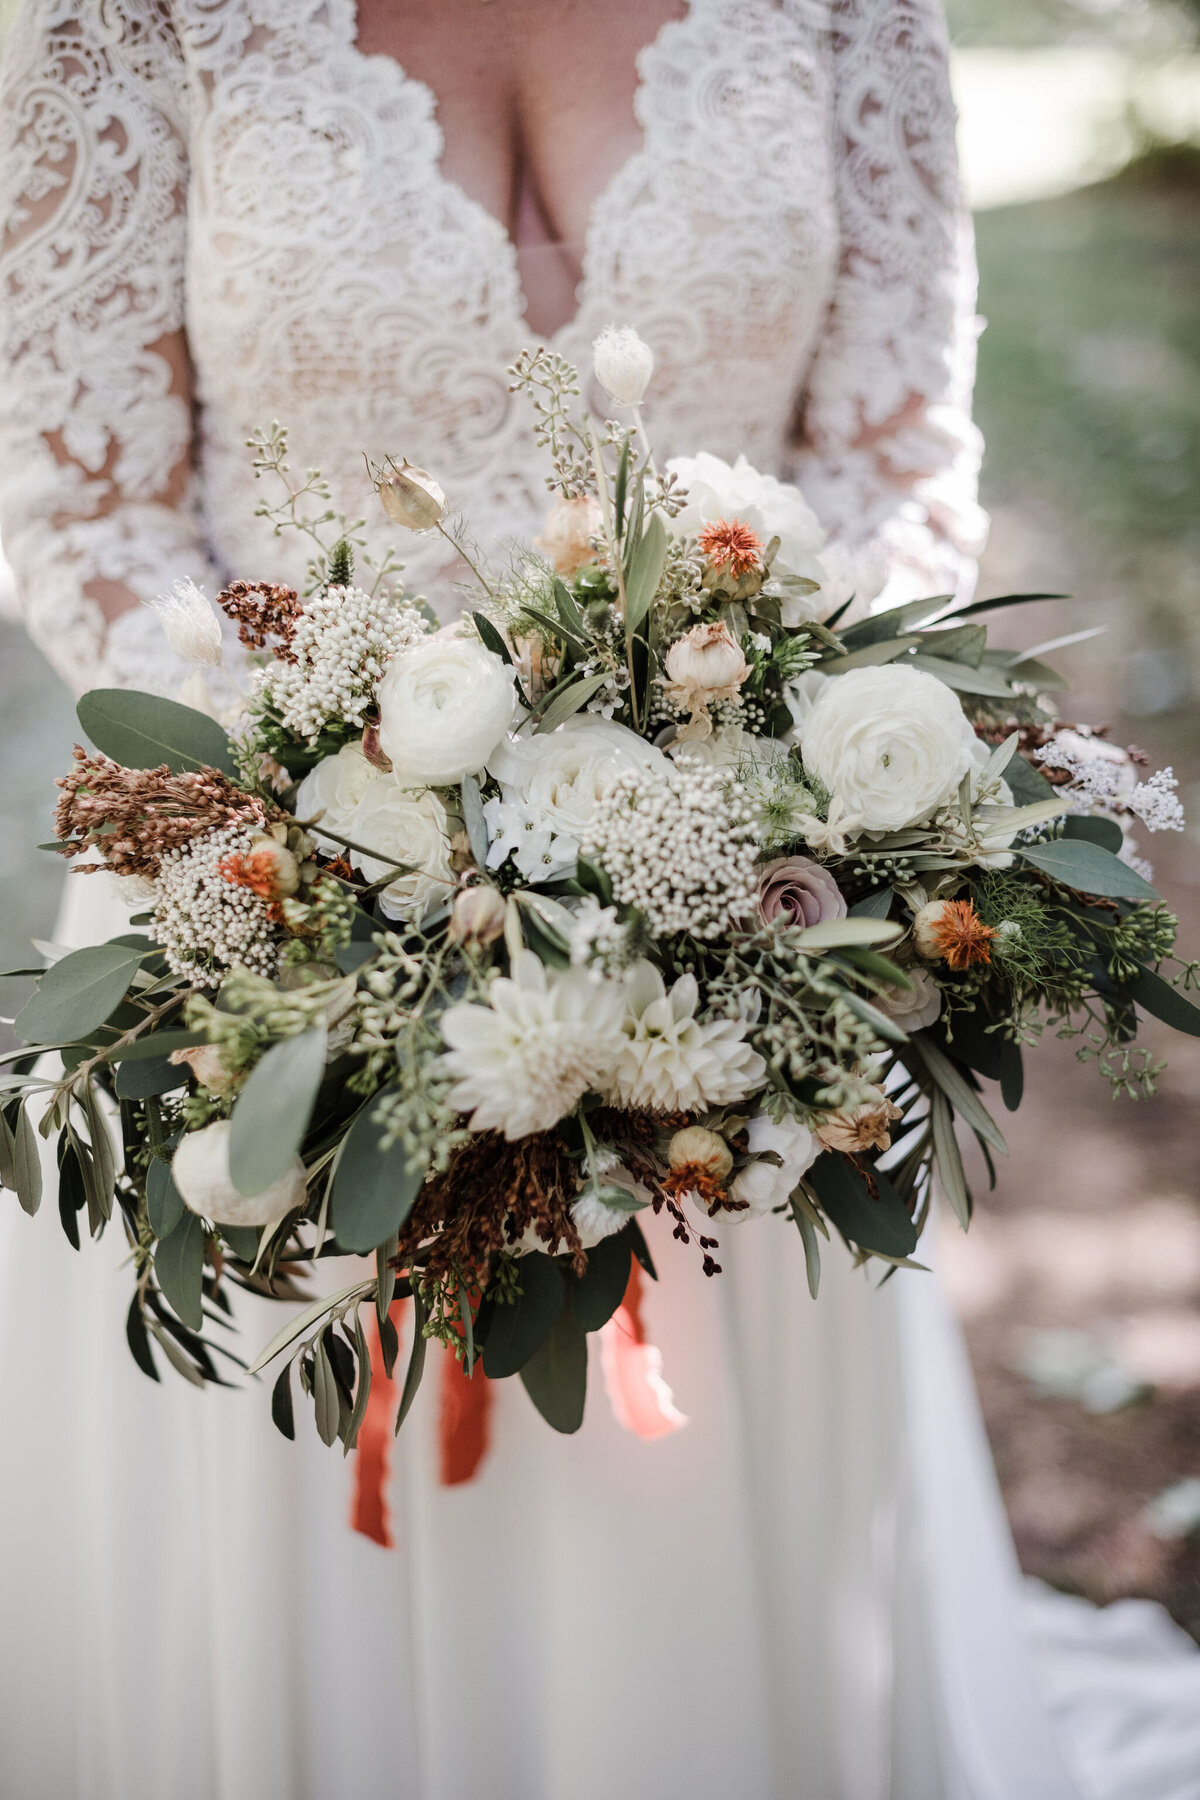 Lacy, textural bridal bouquet with dahlias, ranunculus, olive, rice flower, and dried botanical accents.